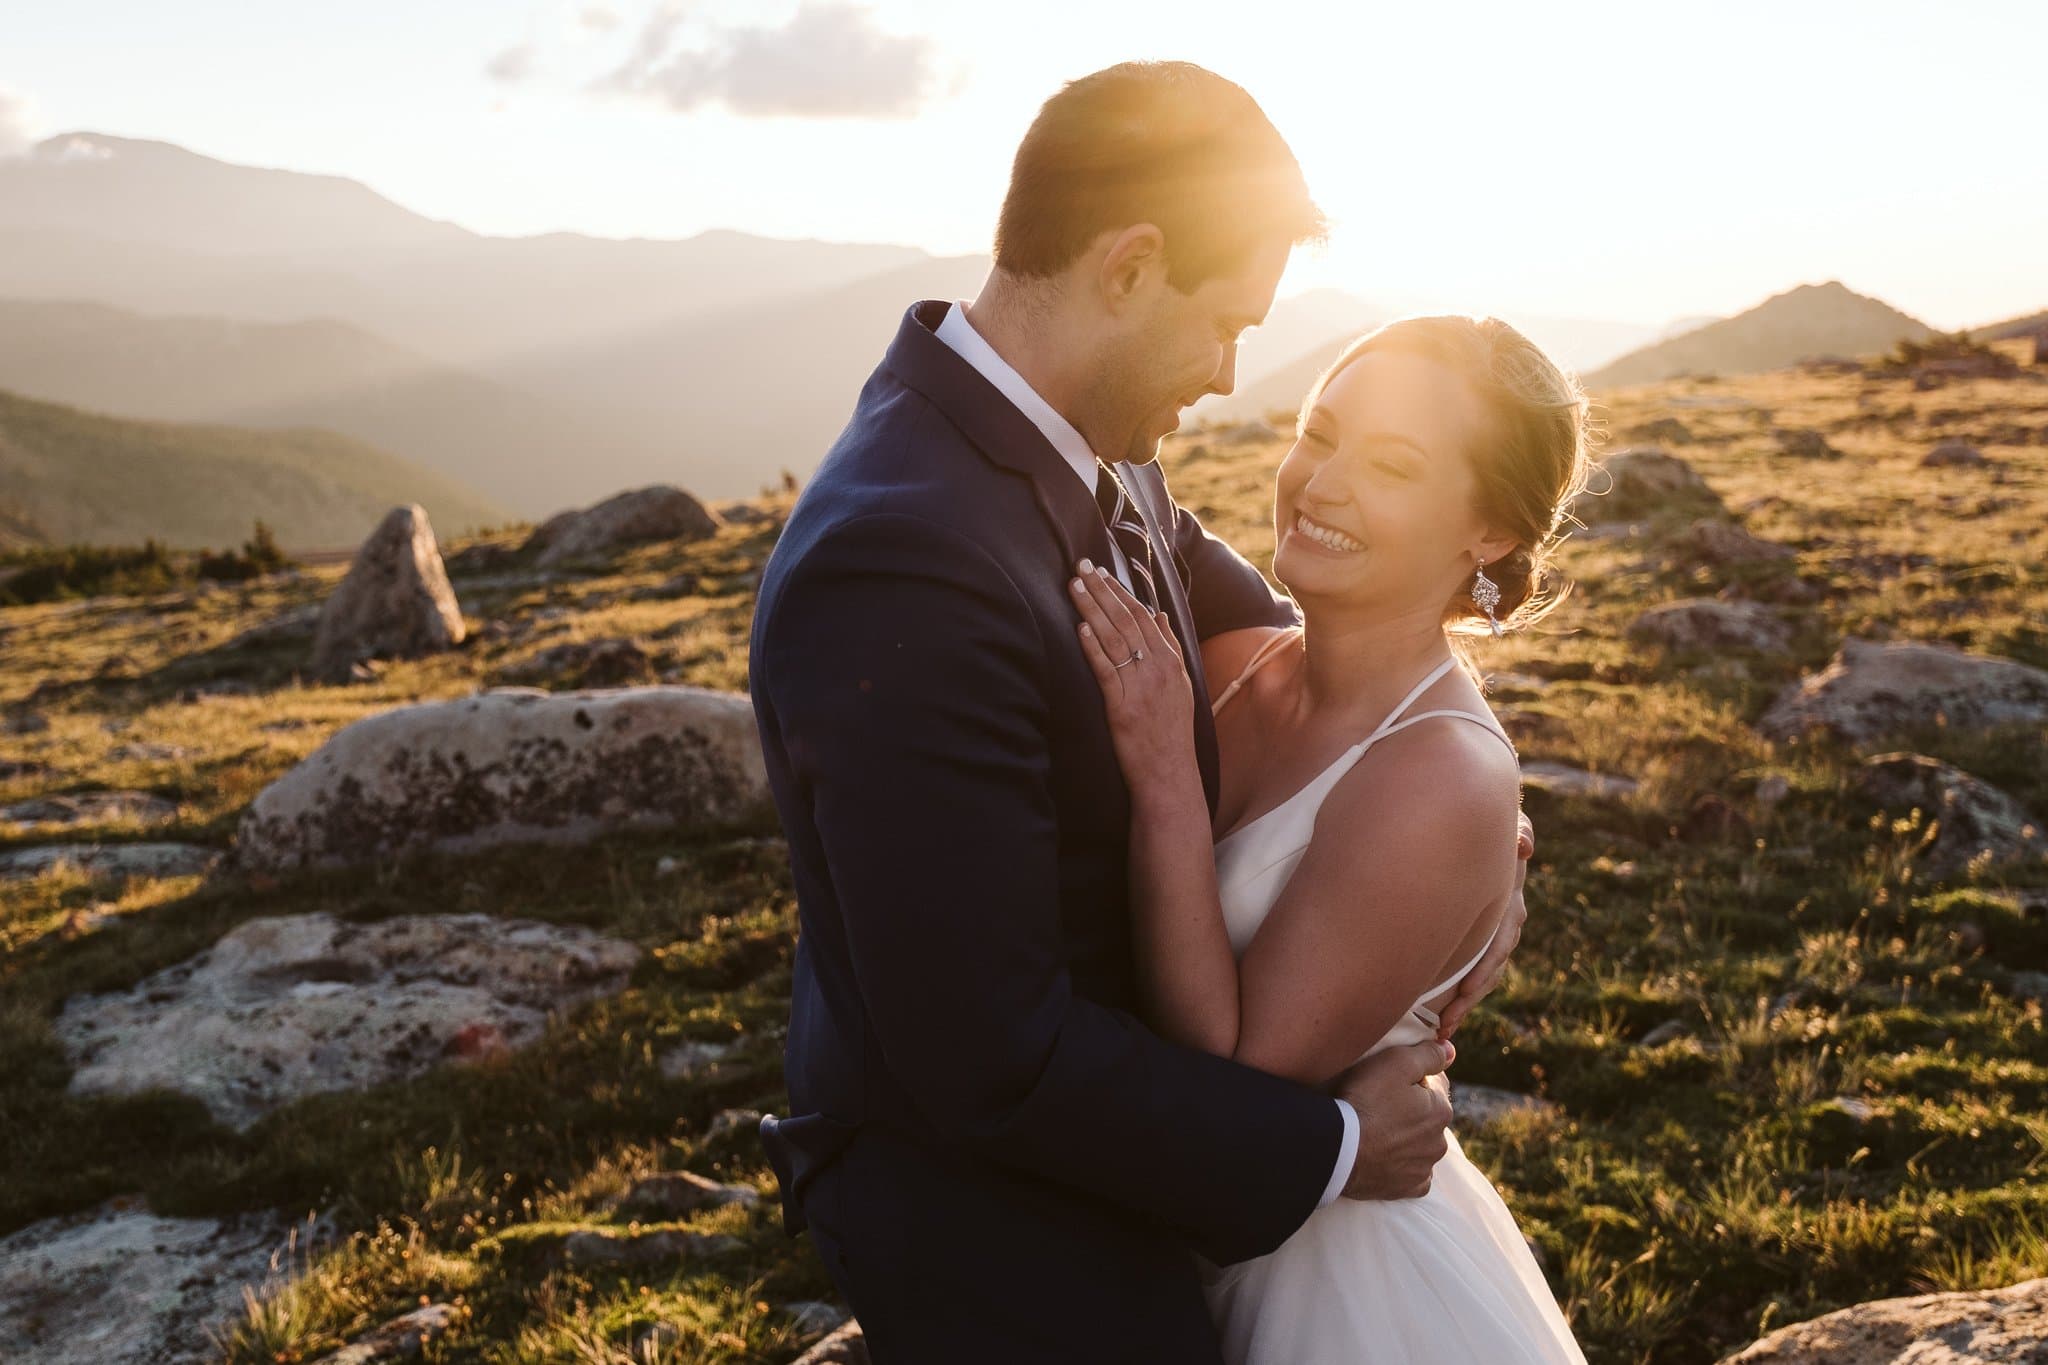 Colorado adventure elopement at sunrise, hiking wedding in the Rocky Mountains